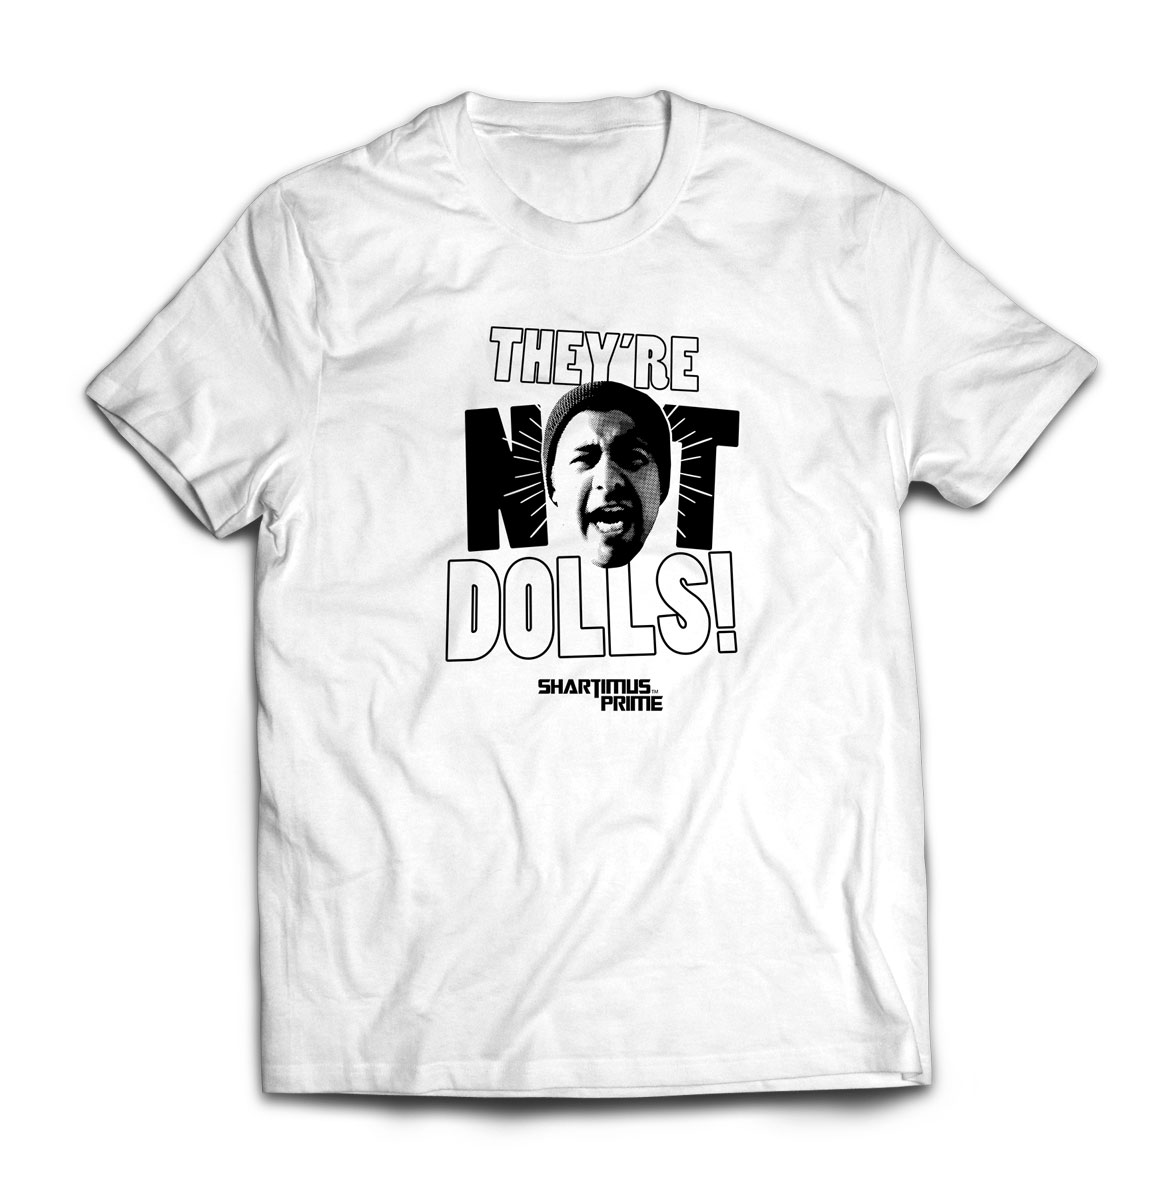 They’re Not Dolls! – White T-shirt